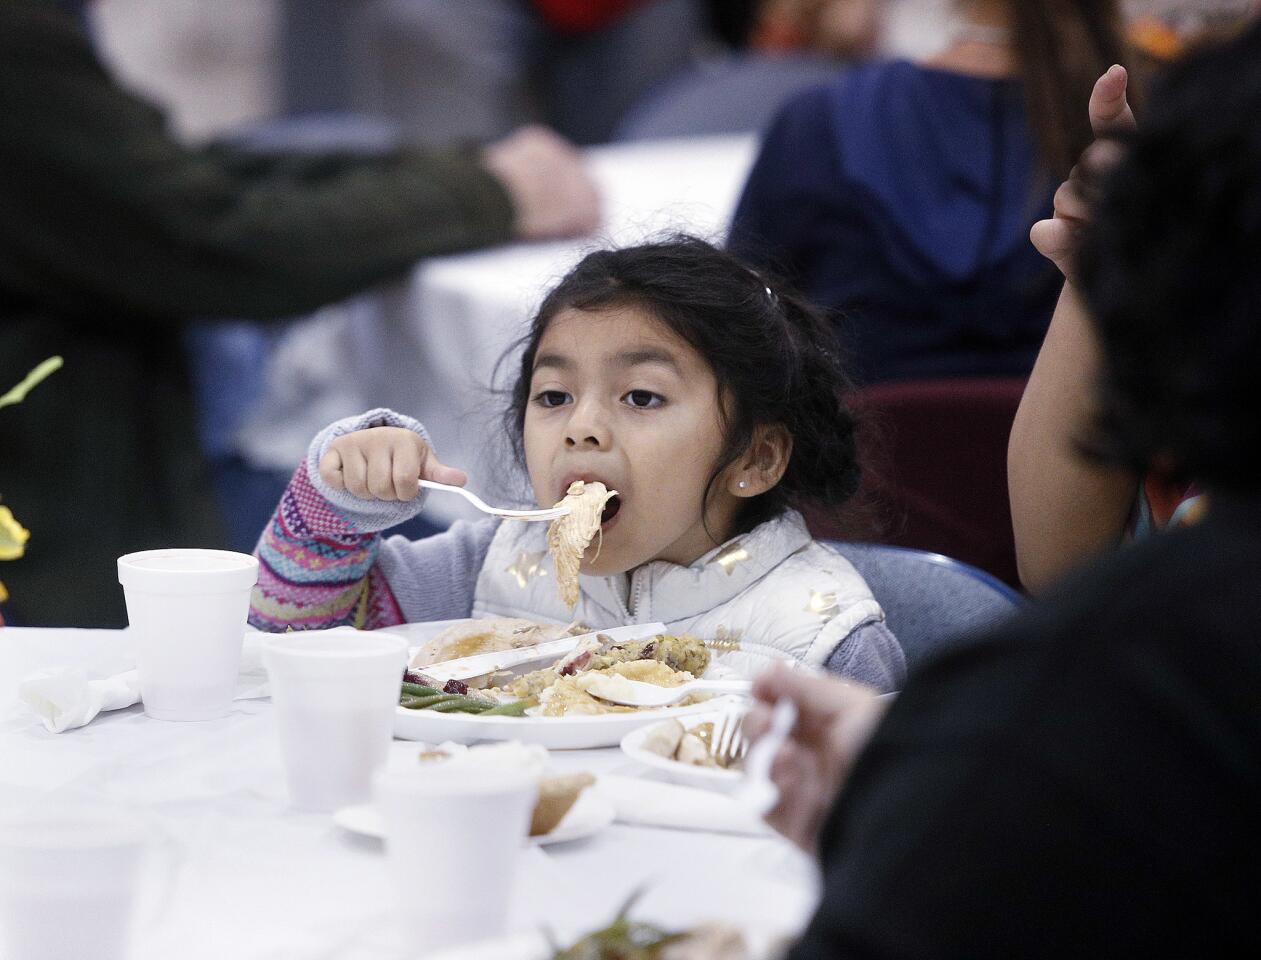 Anabelle Reyes, 4, of Burbank, takes a big bite of a big slice of turkey at The Burbank Salvation Army for the annual Thanksgiving dinner on Wednesday, November 21, 2018.